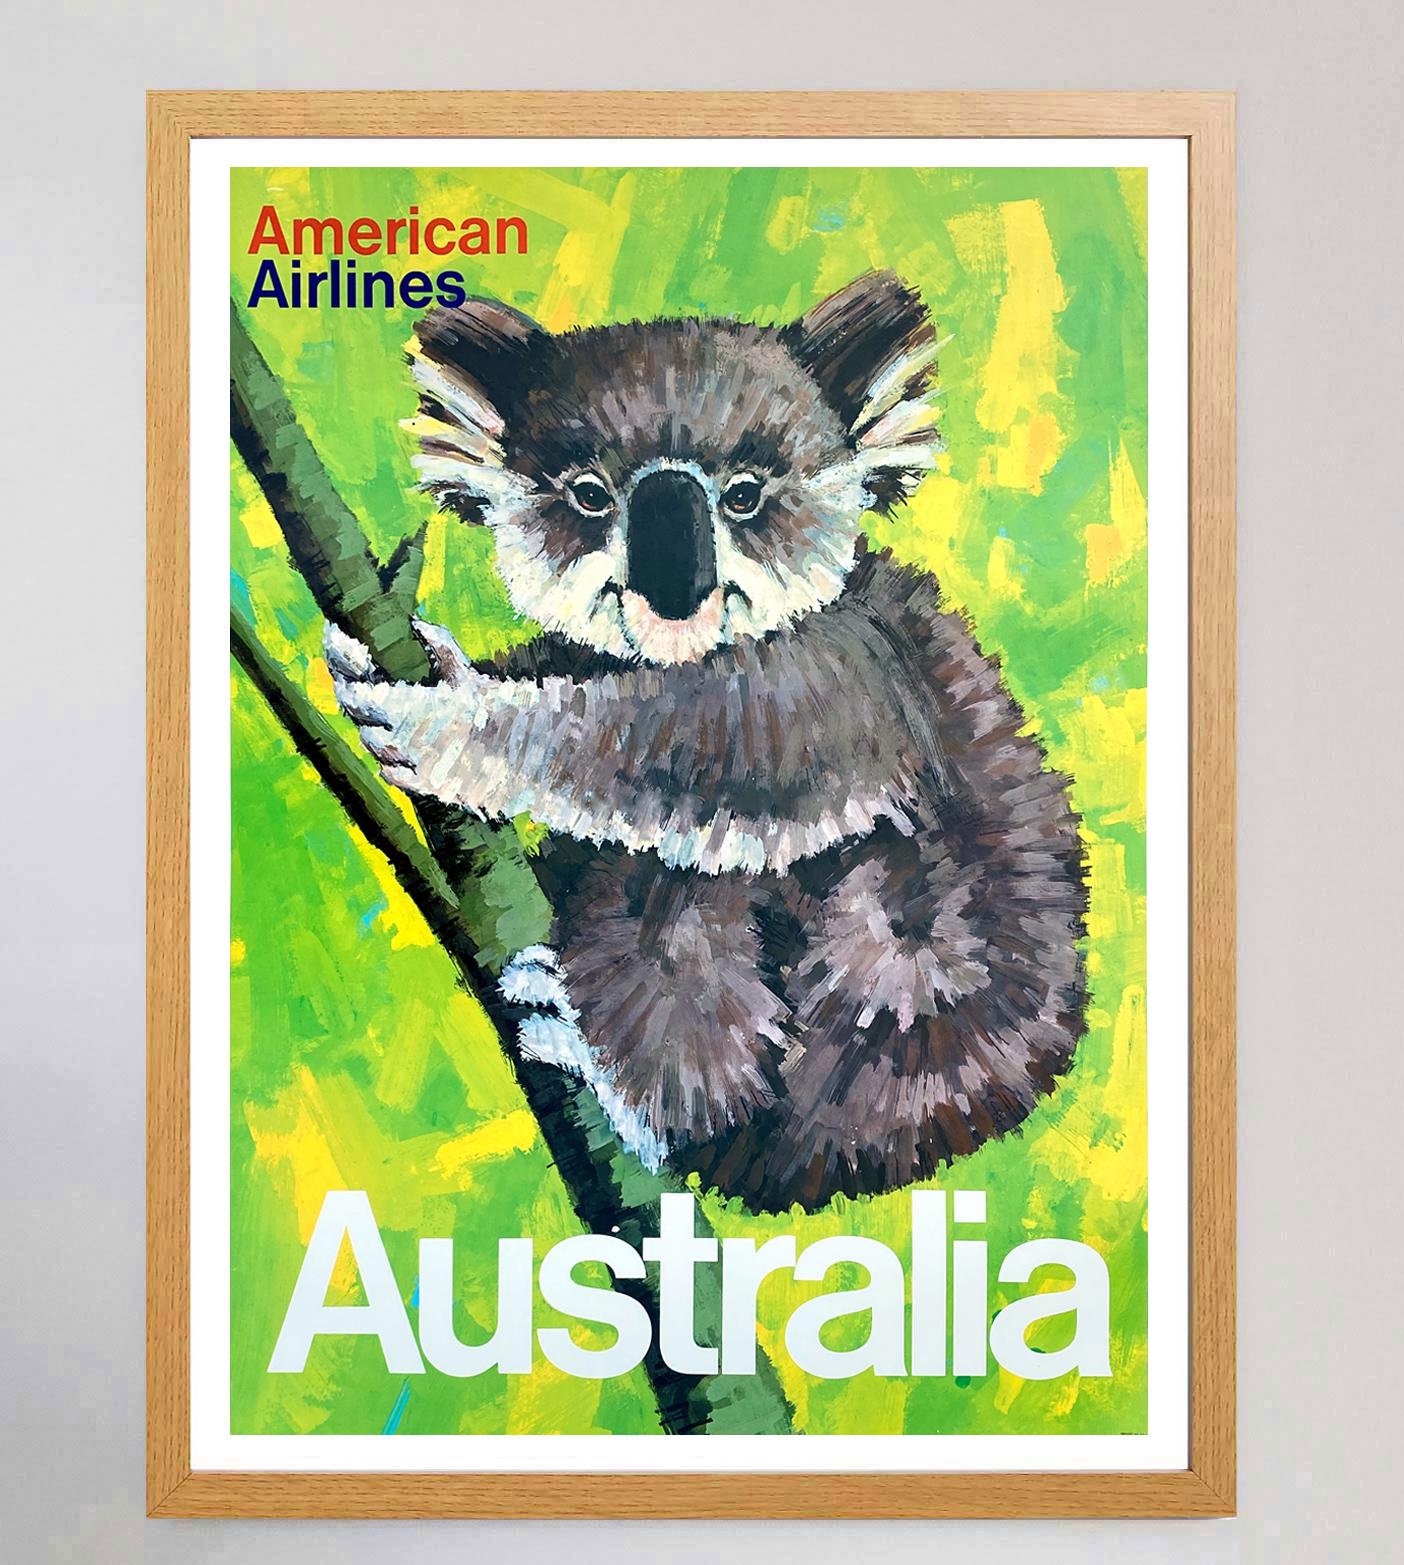 1965 American Airlines - Australia Original Vintage Poster In Good Condition For Sale In Winchester, GB